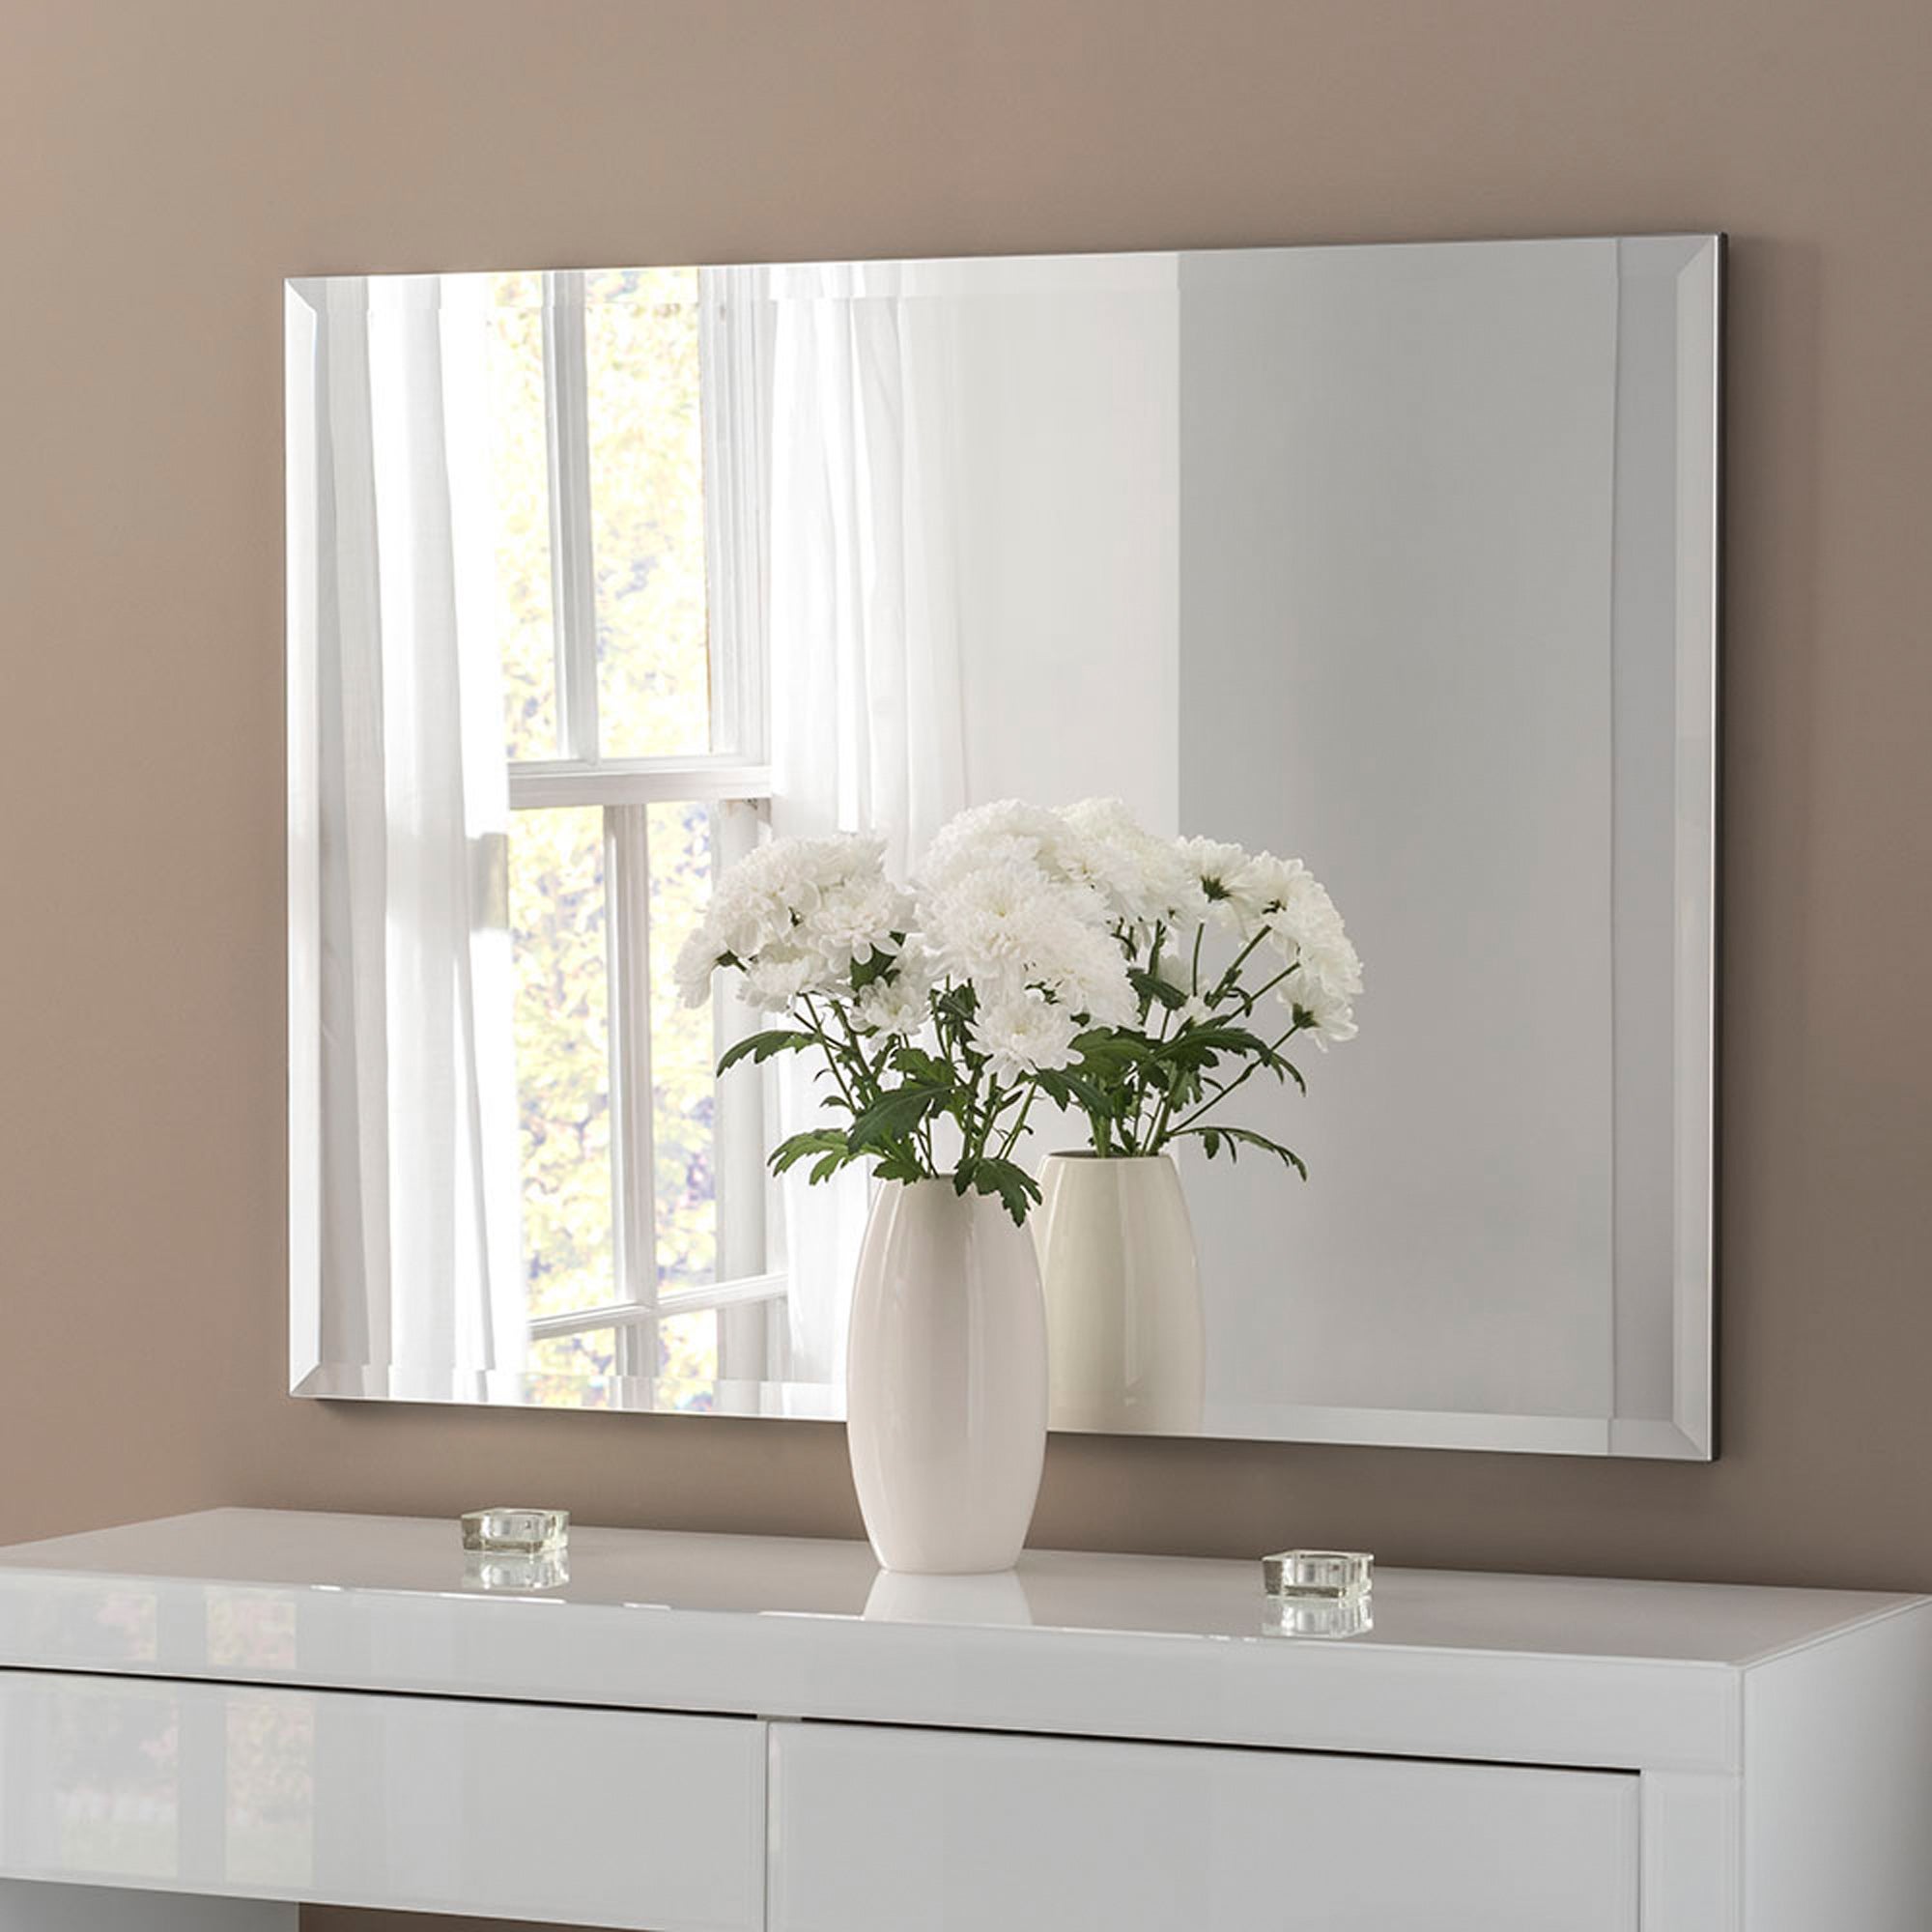 Yearn Bevelled Rectangle Overmantel Wall Mirror